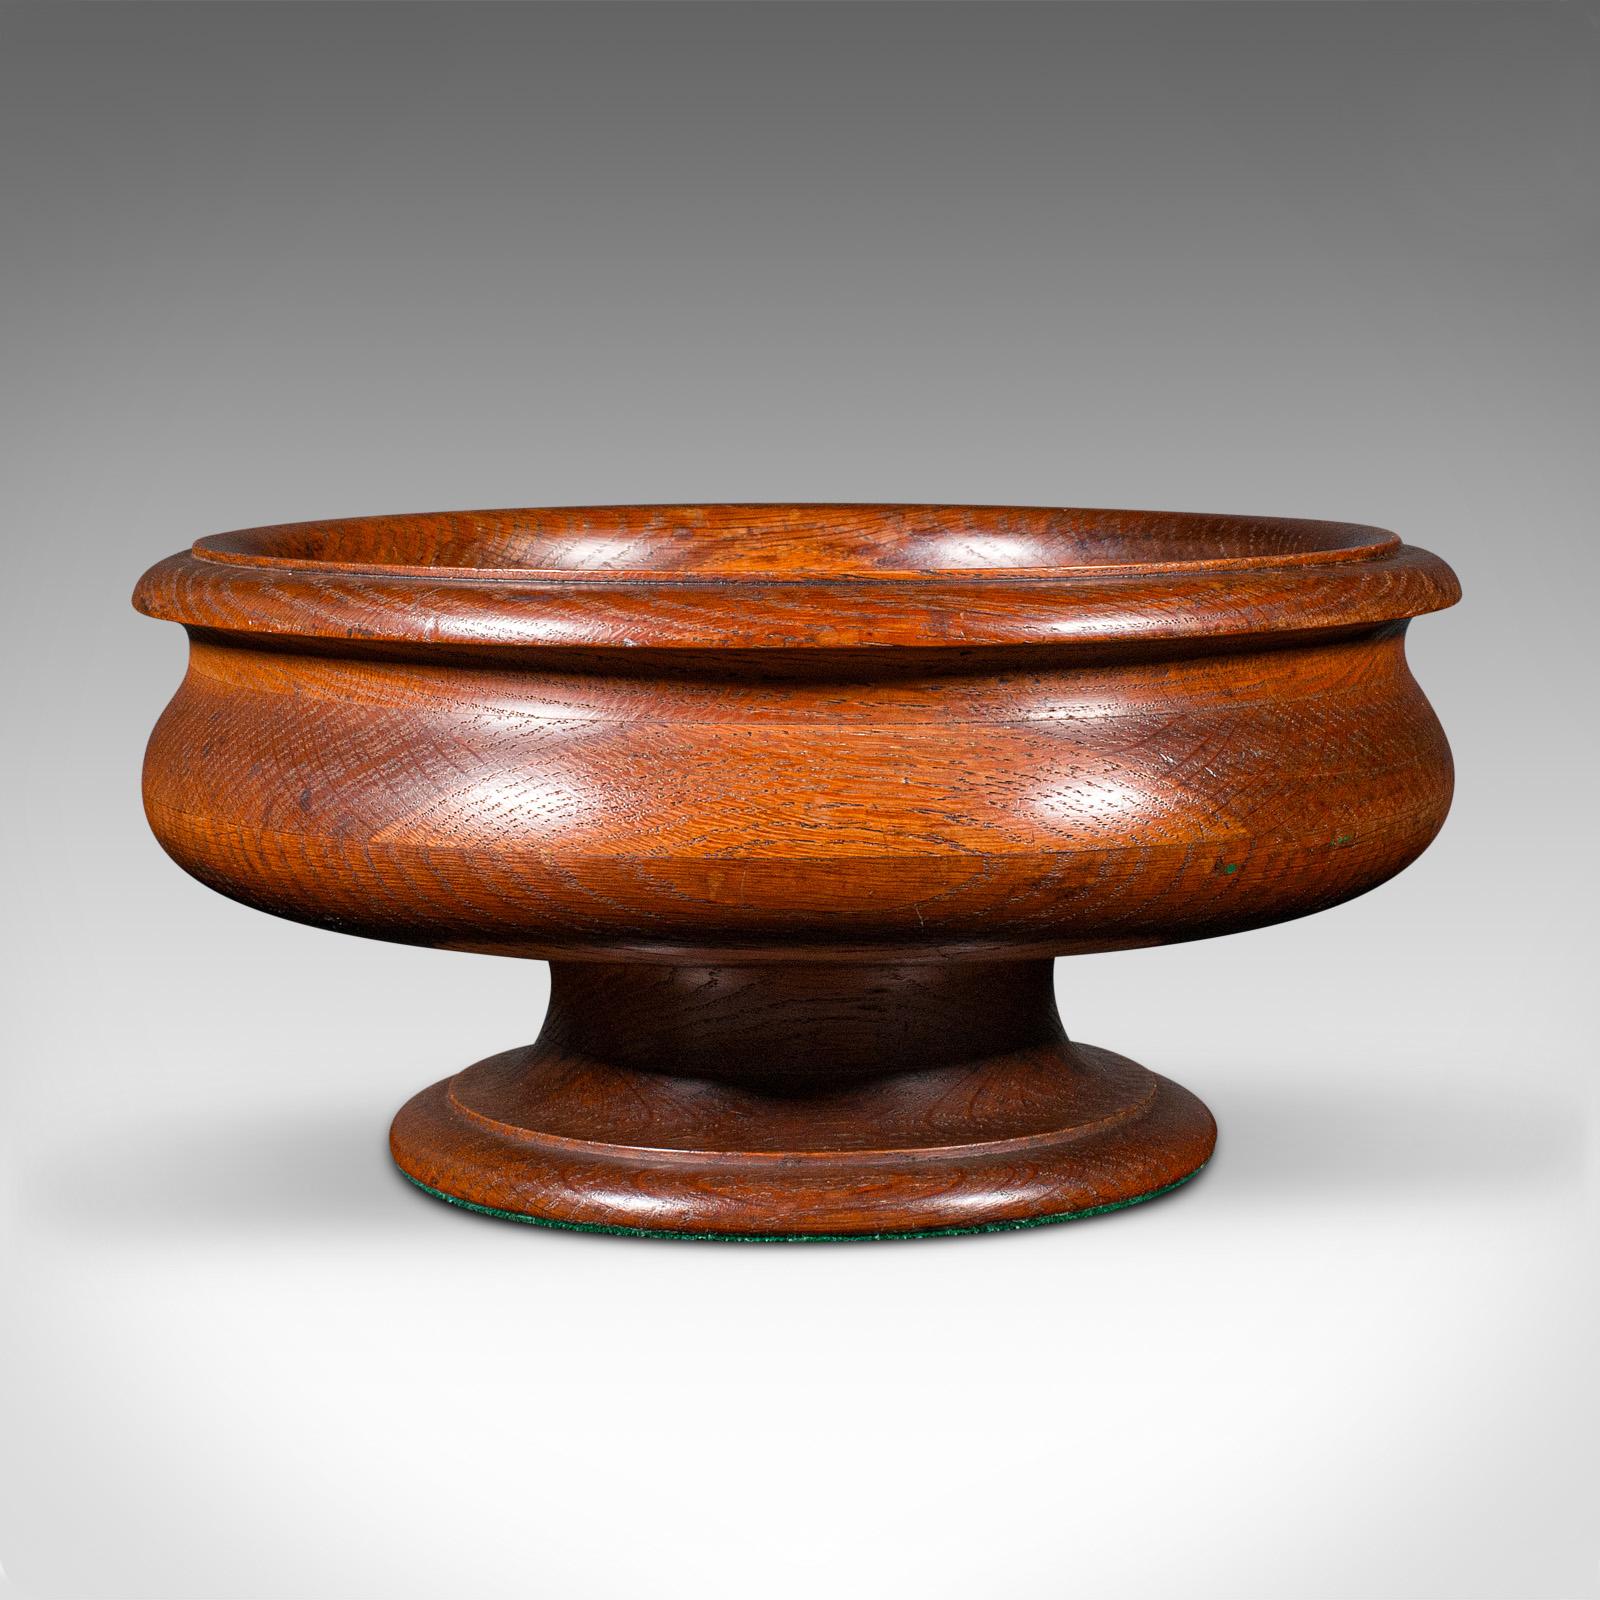 This is an antique fruit bowl. An English, turned oak display dish in Arts & Crafts taste, dating to the late Victorian period, circa 1900.

Classically appealing example of turned craftsmanship
Displays a desirable aged patina and in good